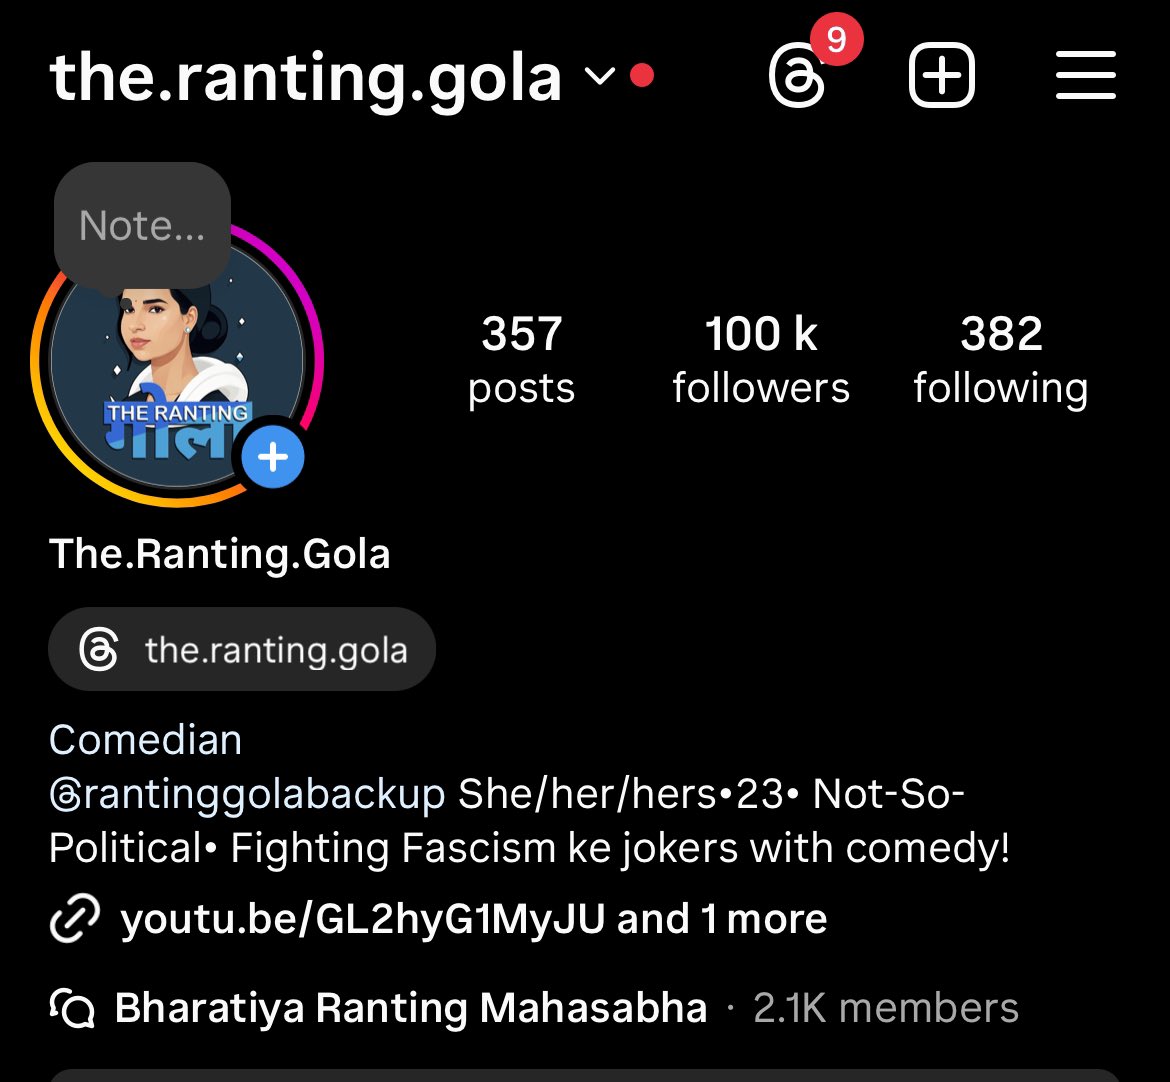 From suspension in January to 100K in April! Thank you everyone for all the support✨💓🌻 Inquilab ZINDABAD (with a lil bit of comedy)